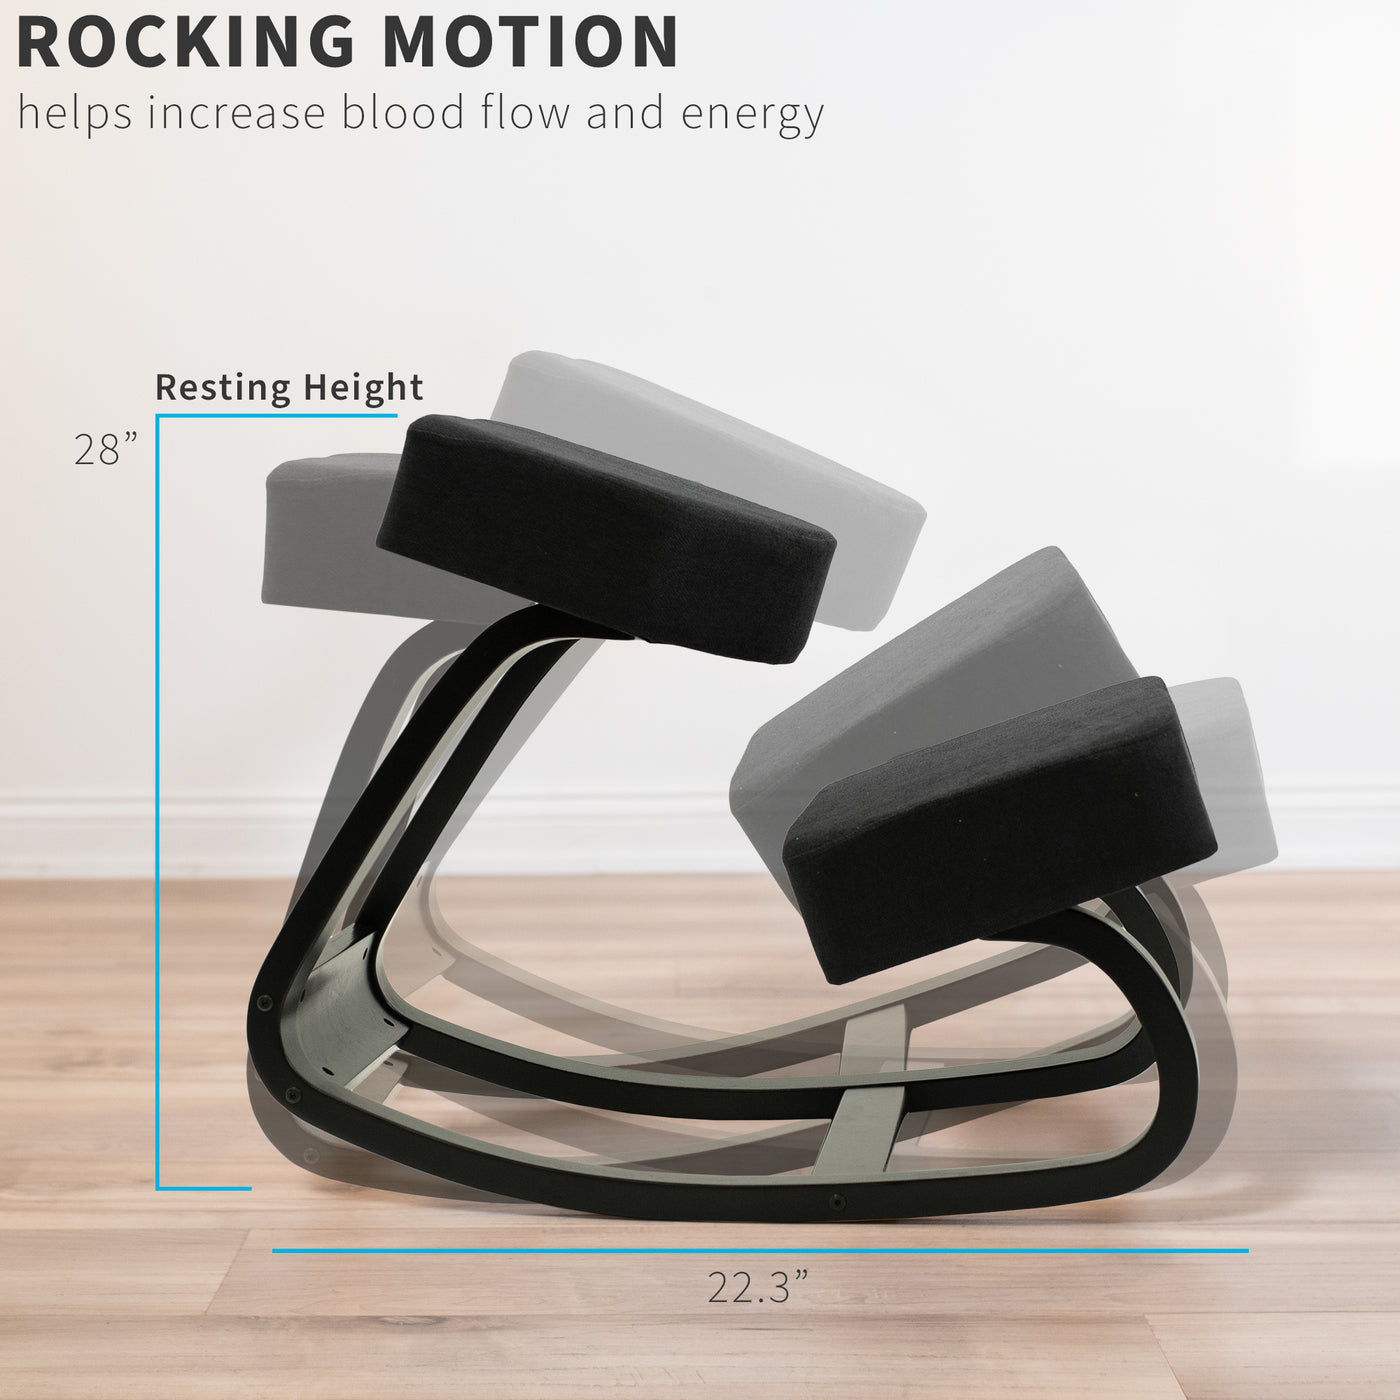 The feature of comfortable rocking motion is designed to create slight movement while working.